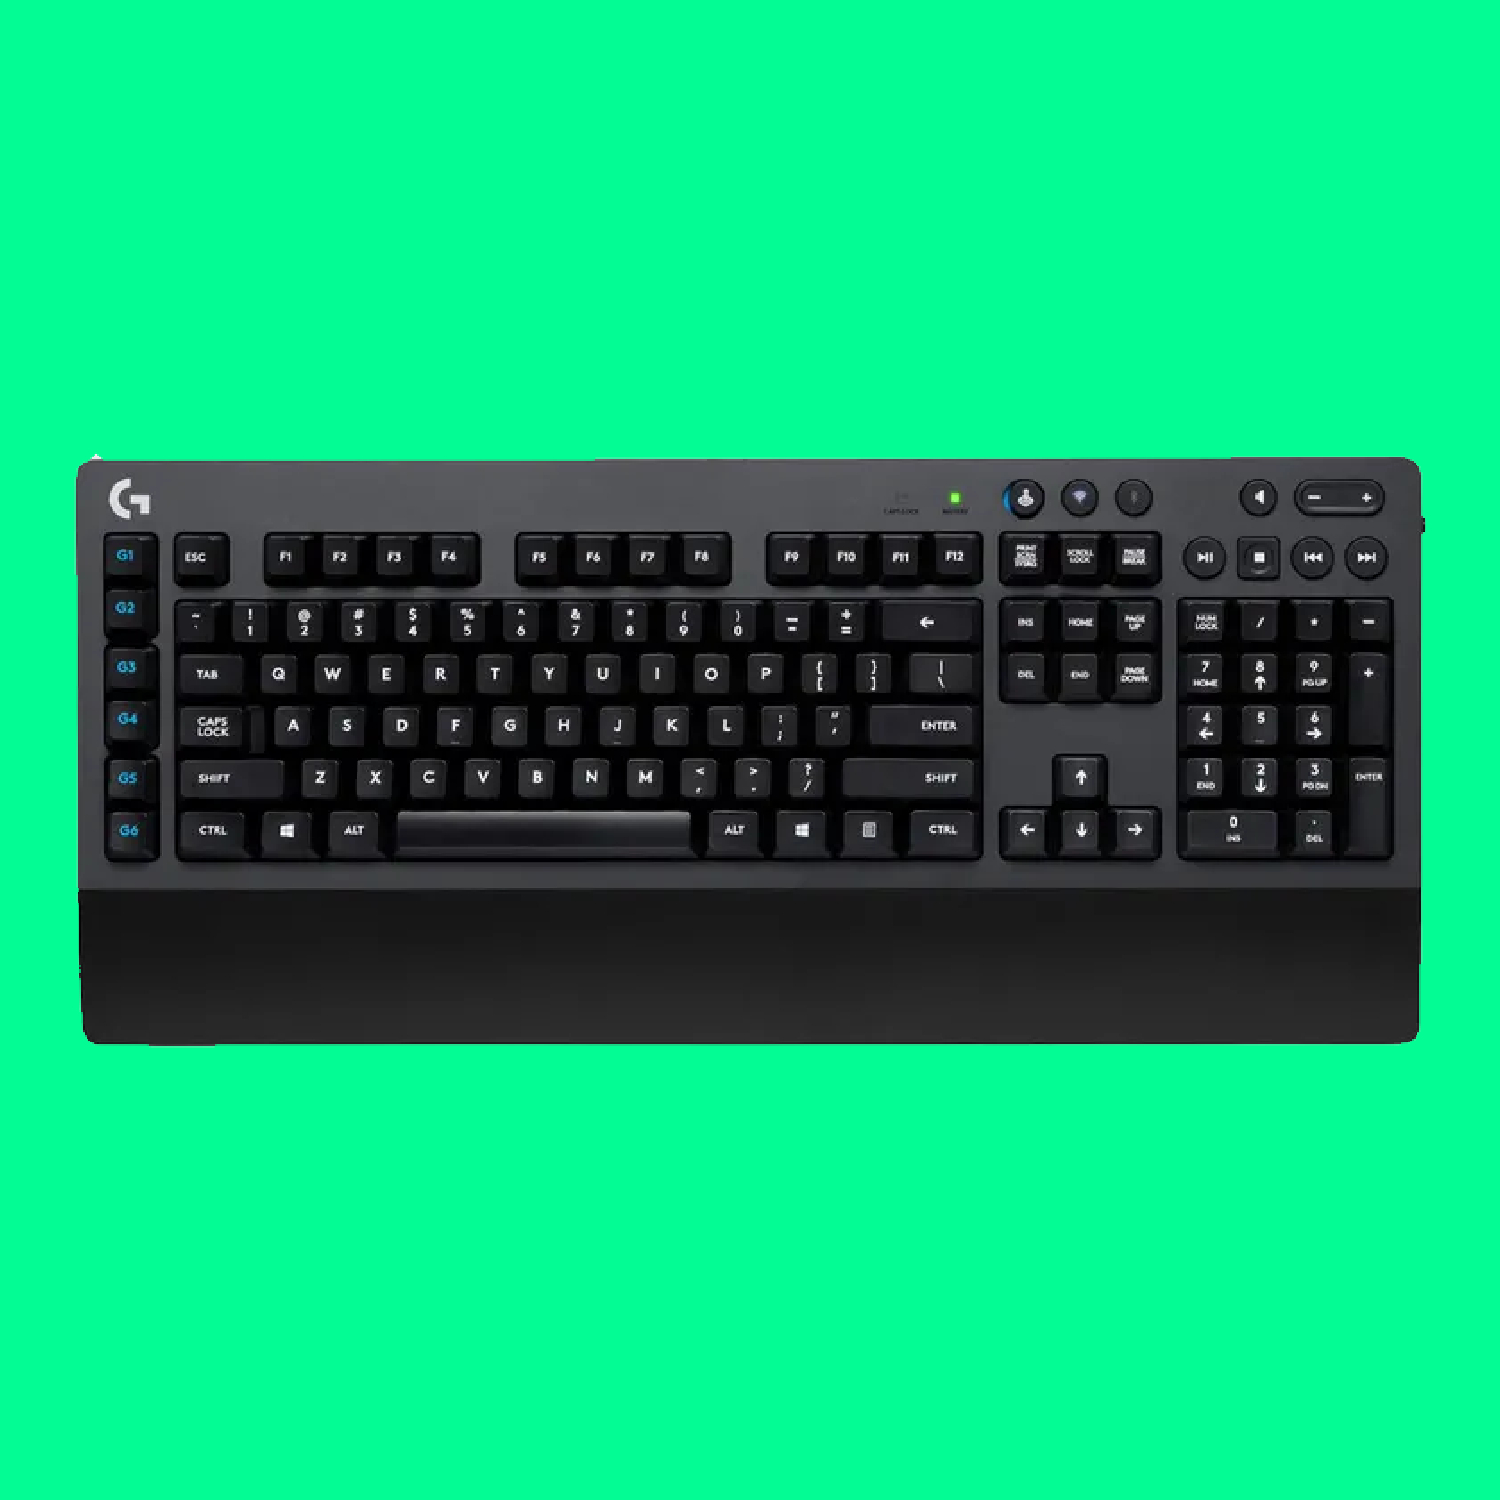 Best Gaming Keyboards 2024: These Keyboards Will Bring You Victory